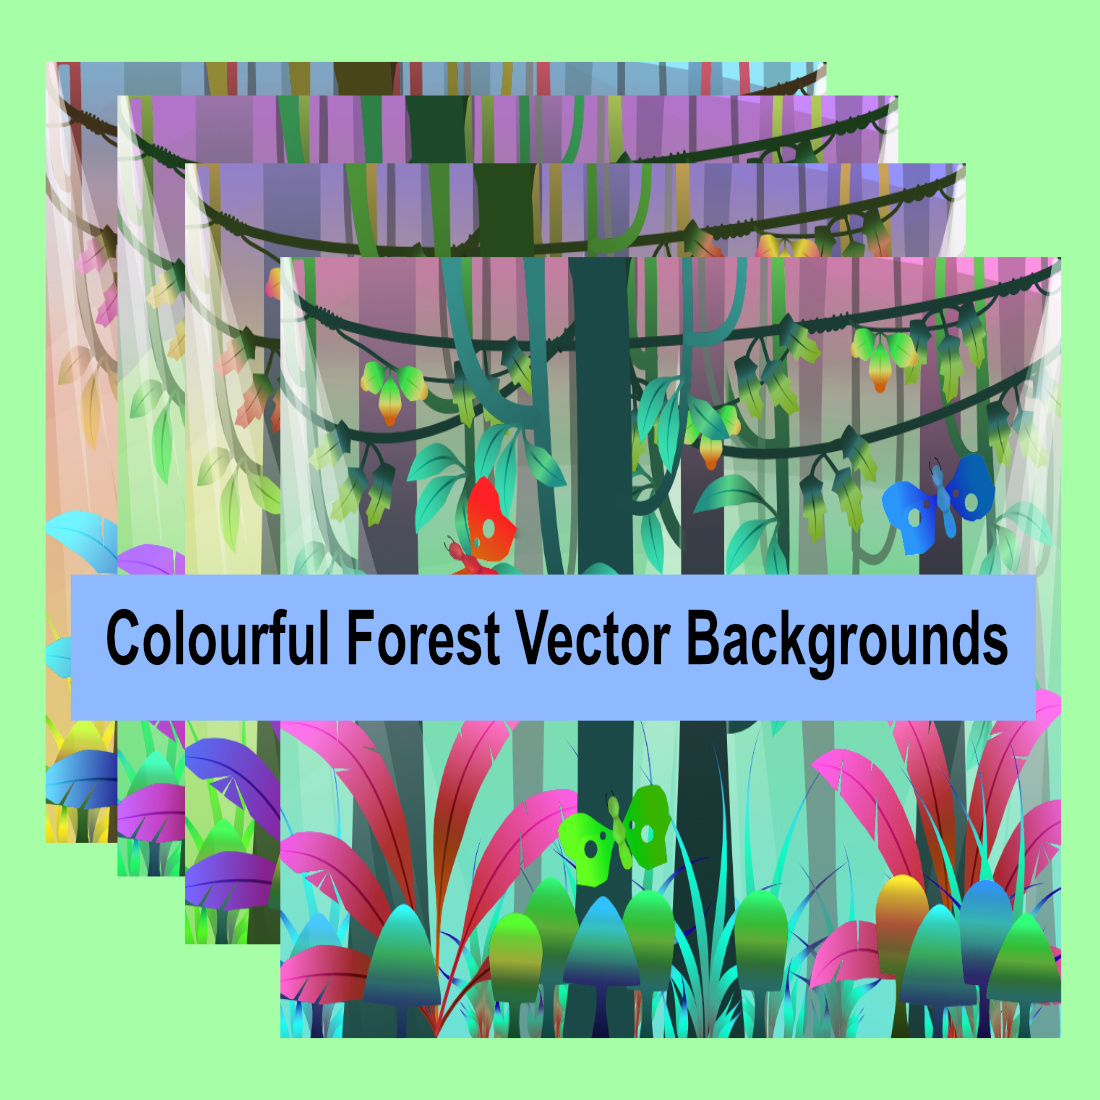 4 colourful forest vector background images cover image.